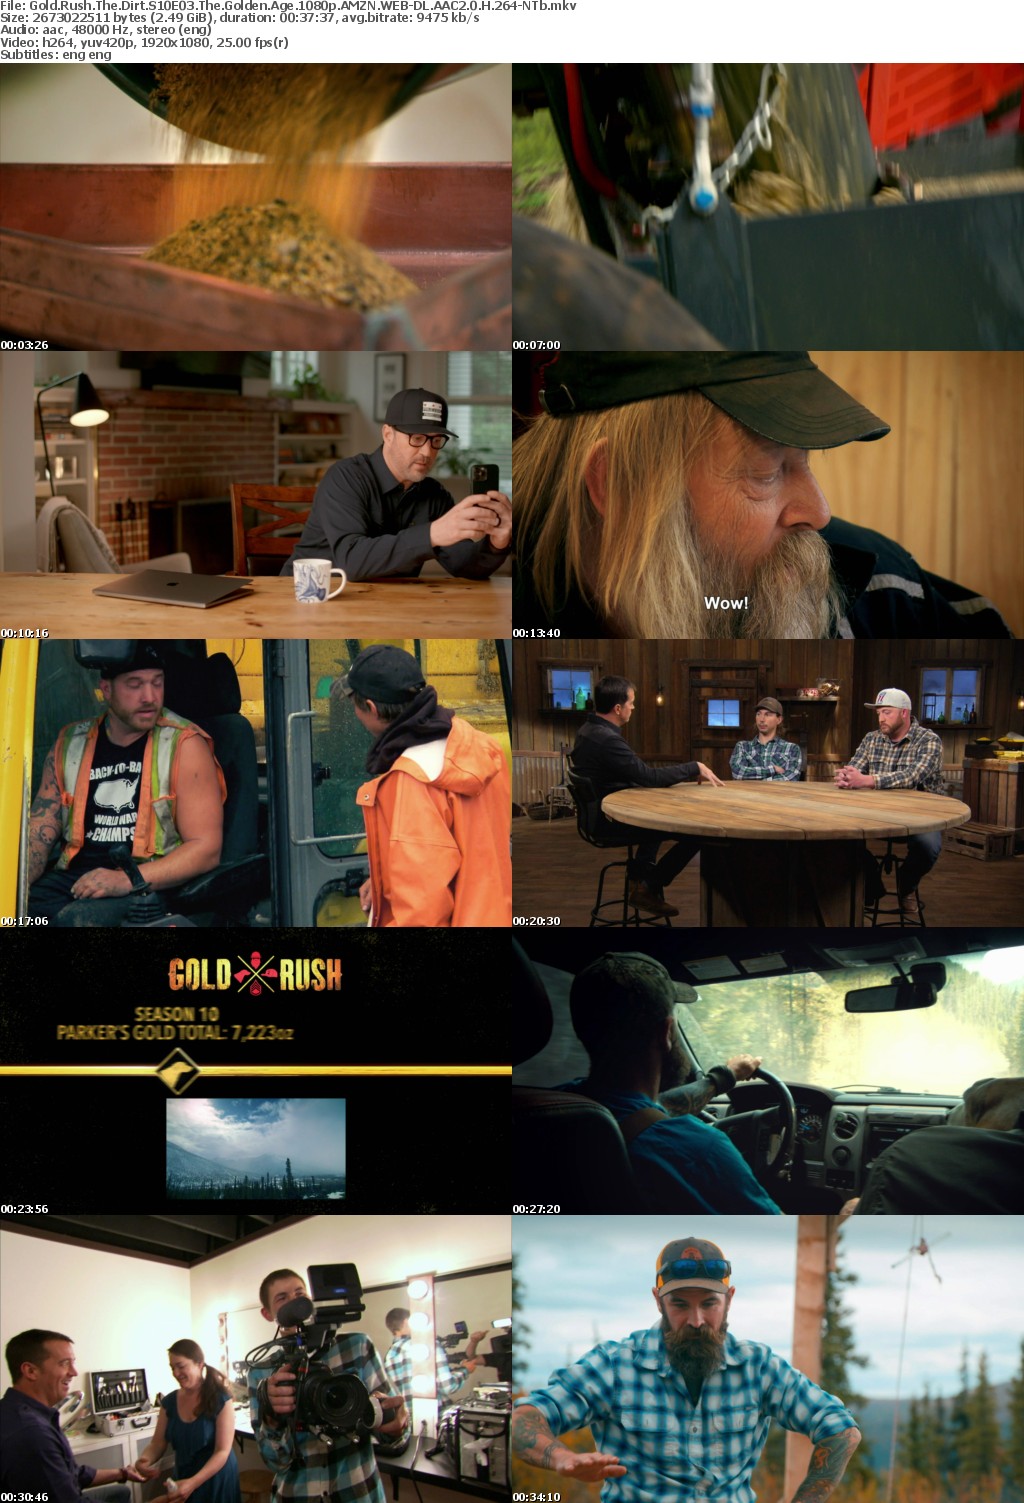 Gold Rush The Dirt S10E03 The Golden Age 1080p AMZN WEB-DL AAC2 0 H 264-NTb